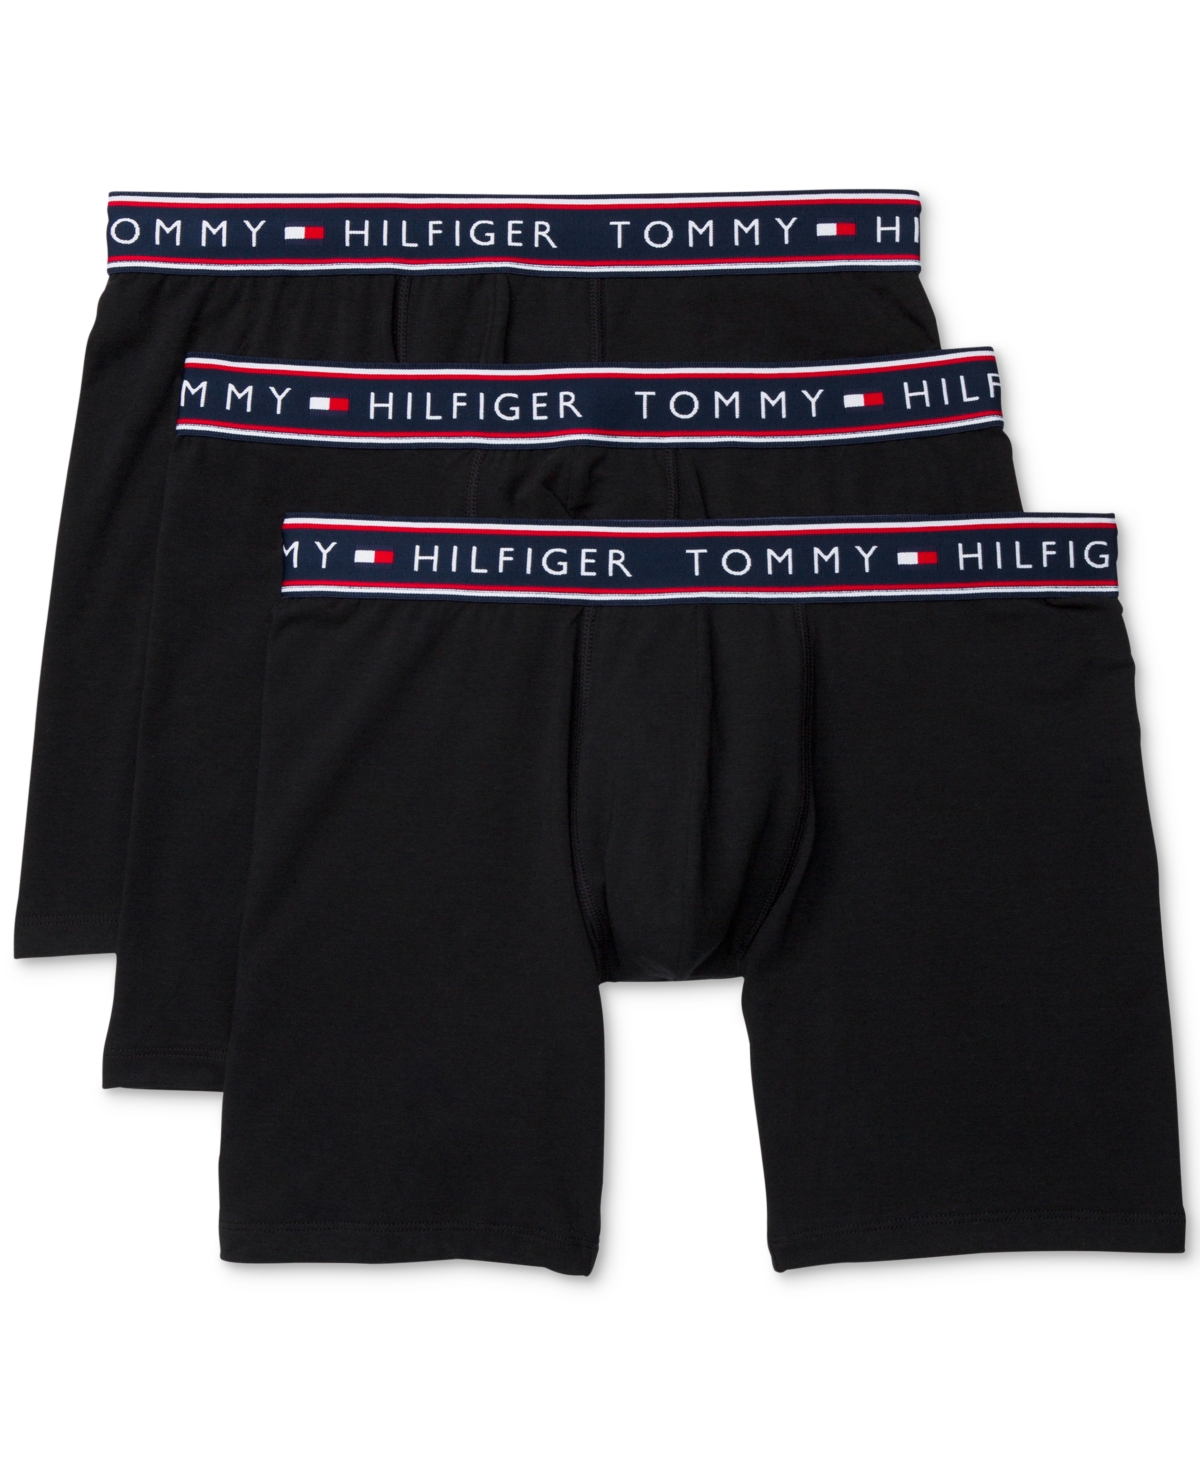 UPC 088541539289 product image for Tommy Hilfiger Men's Cotton Stretch Boxer Brief, 3 Pack | upcitemdb.com